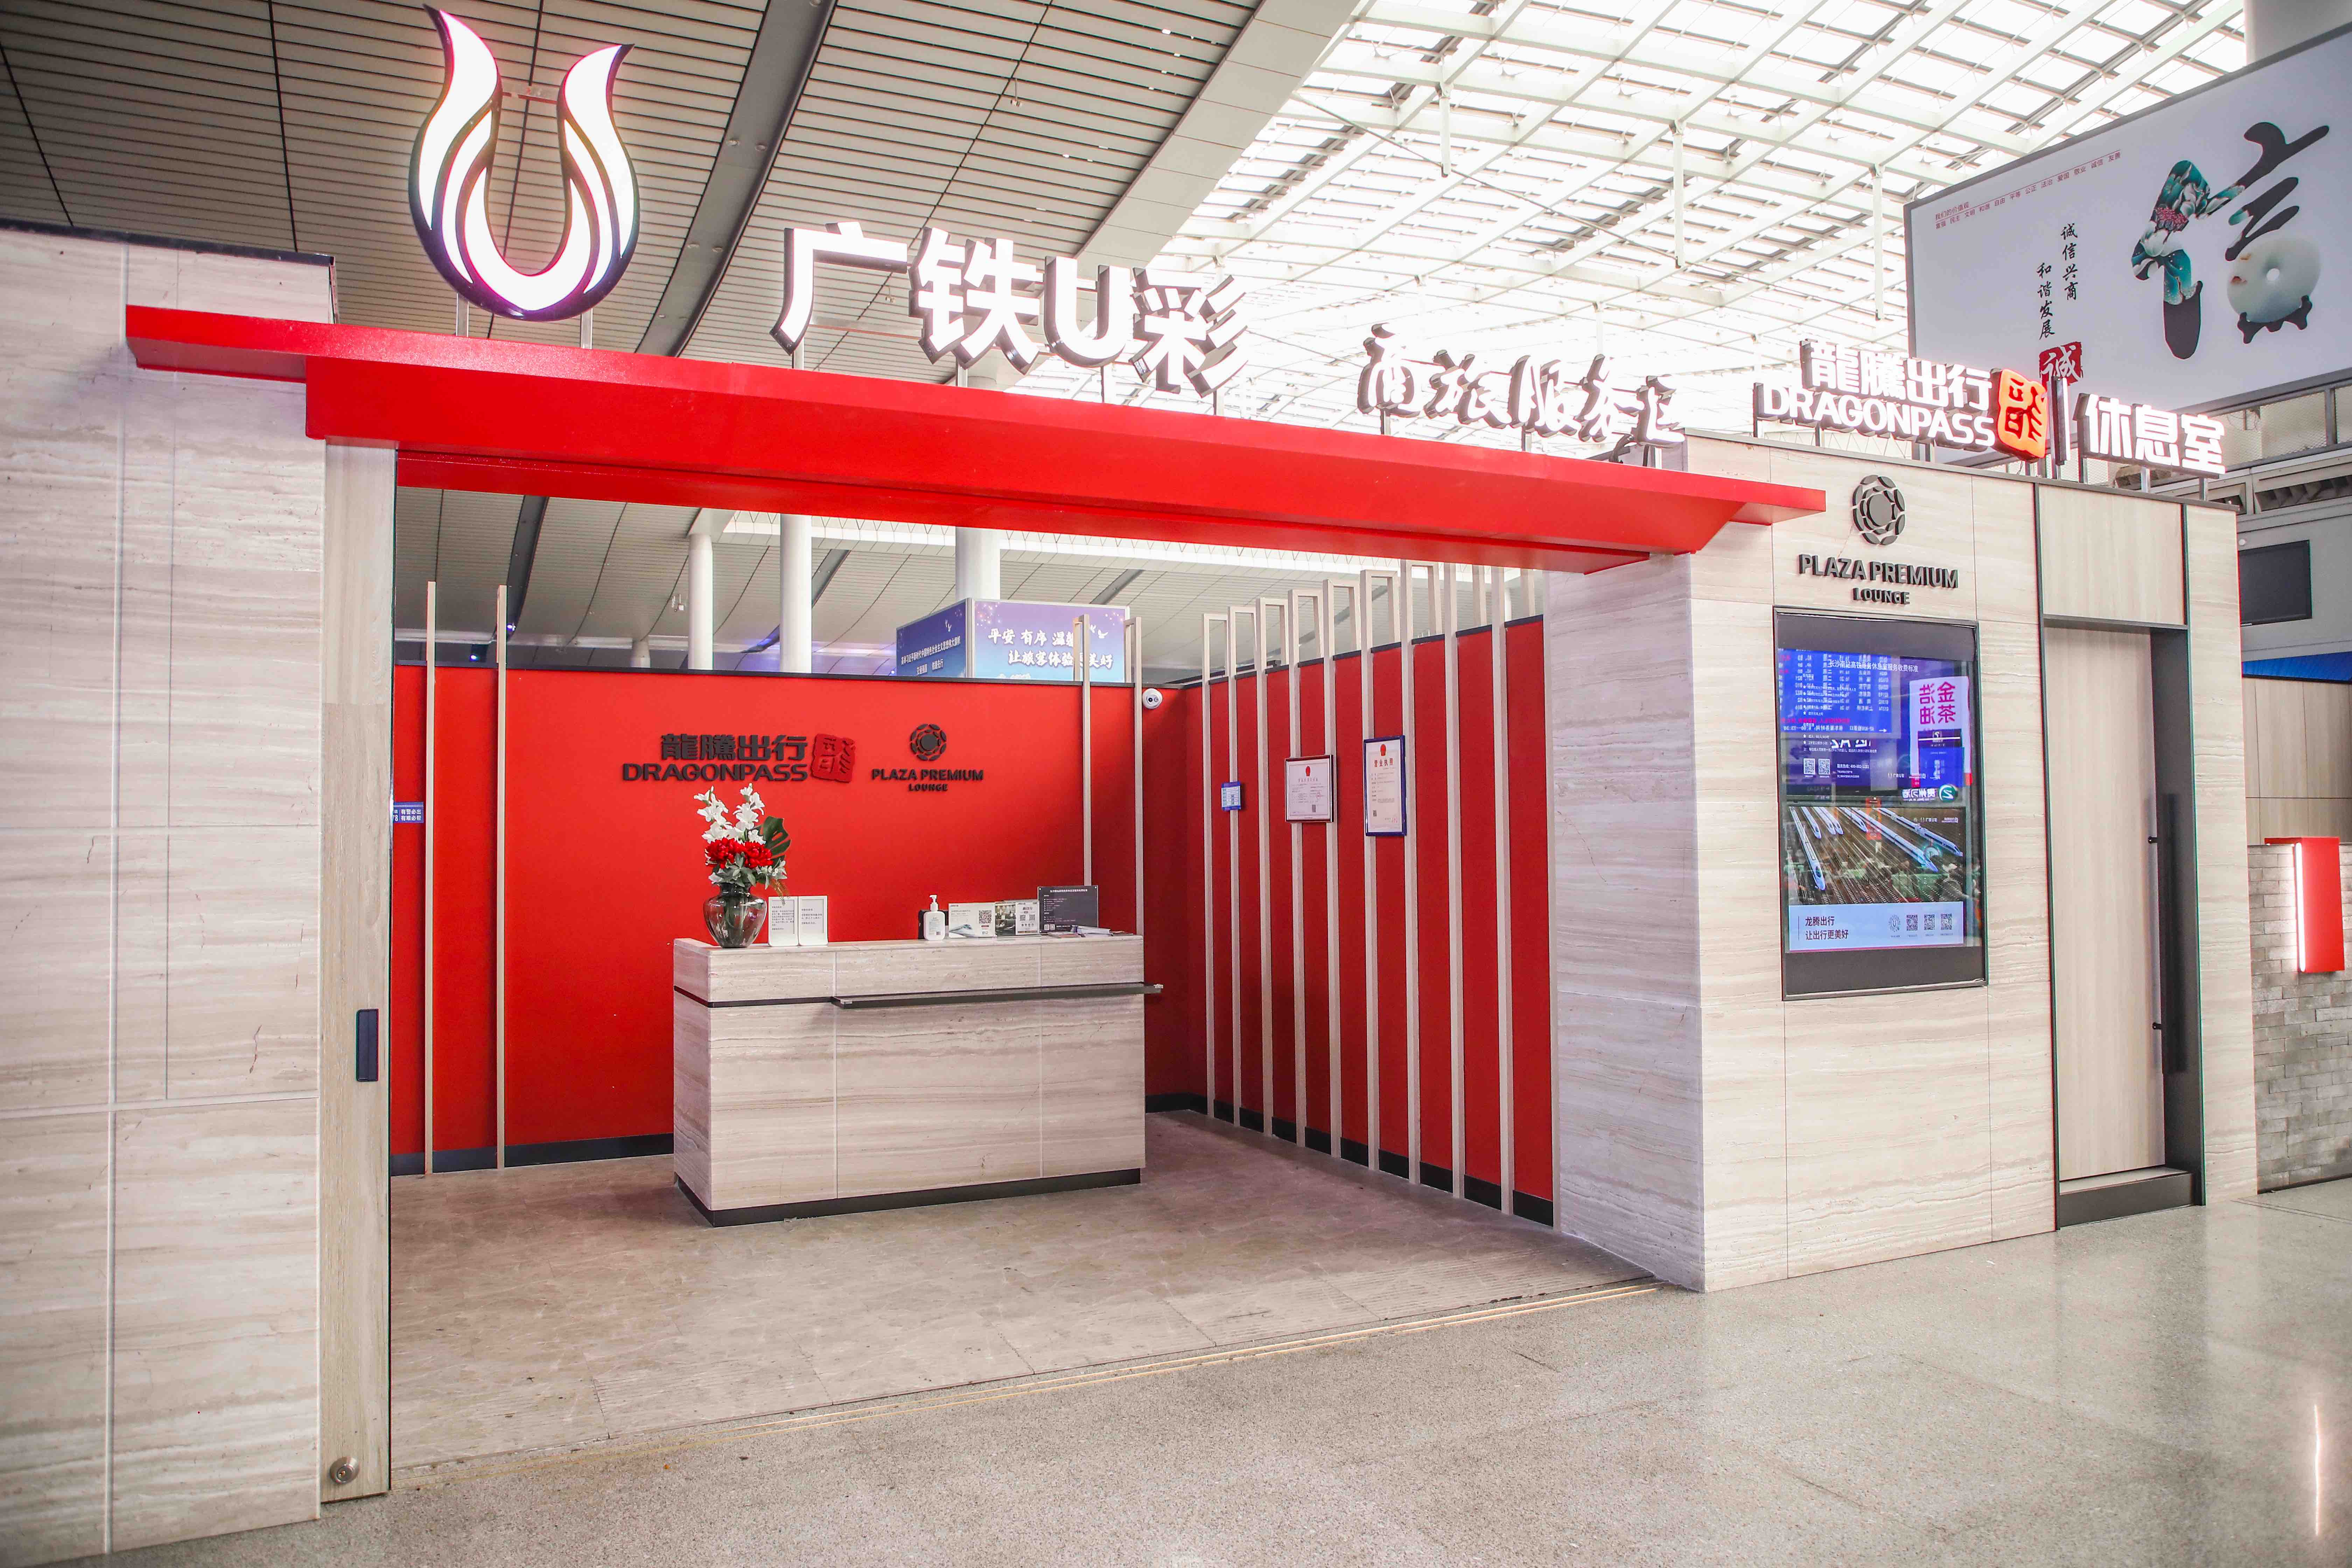 Plaza Premium Lounge Extends Lounge Experience to High-speed Railway Lounges in China